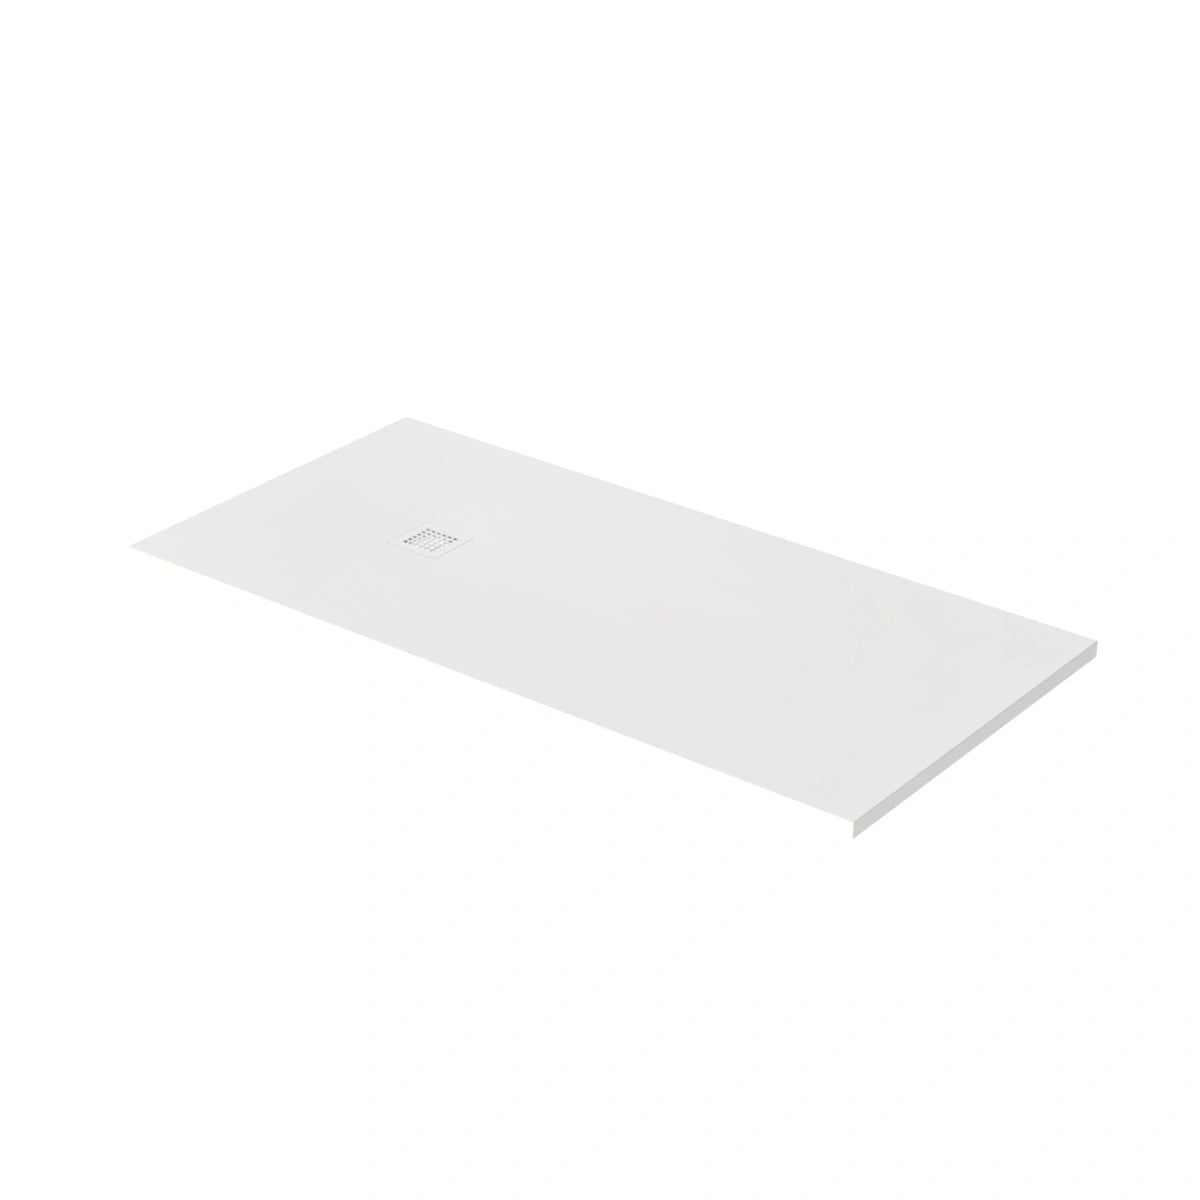 Shower base Newforce Rock 2.0 - 70.87 in.  x 35.43 in. - white structure